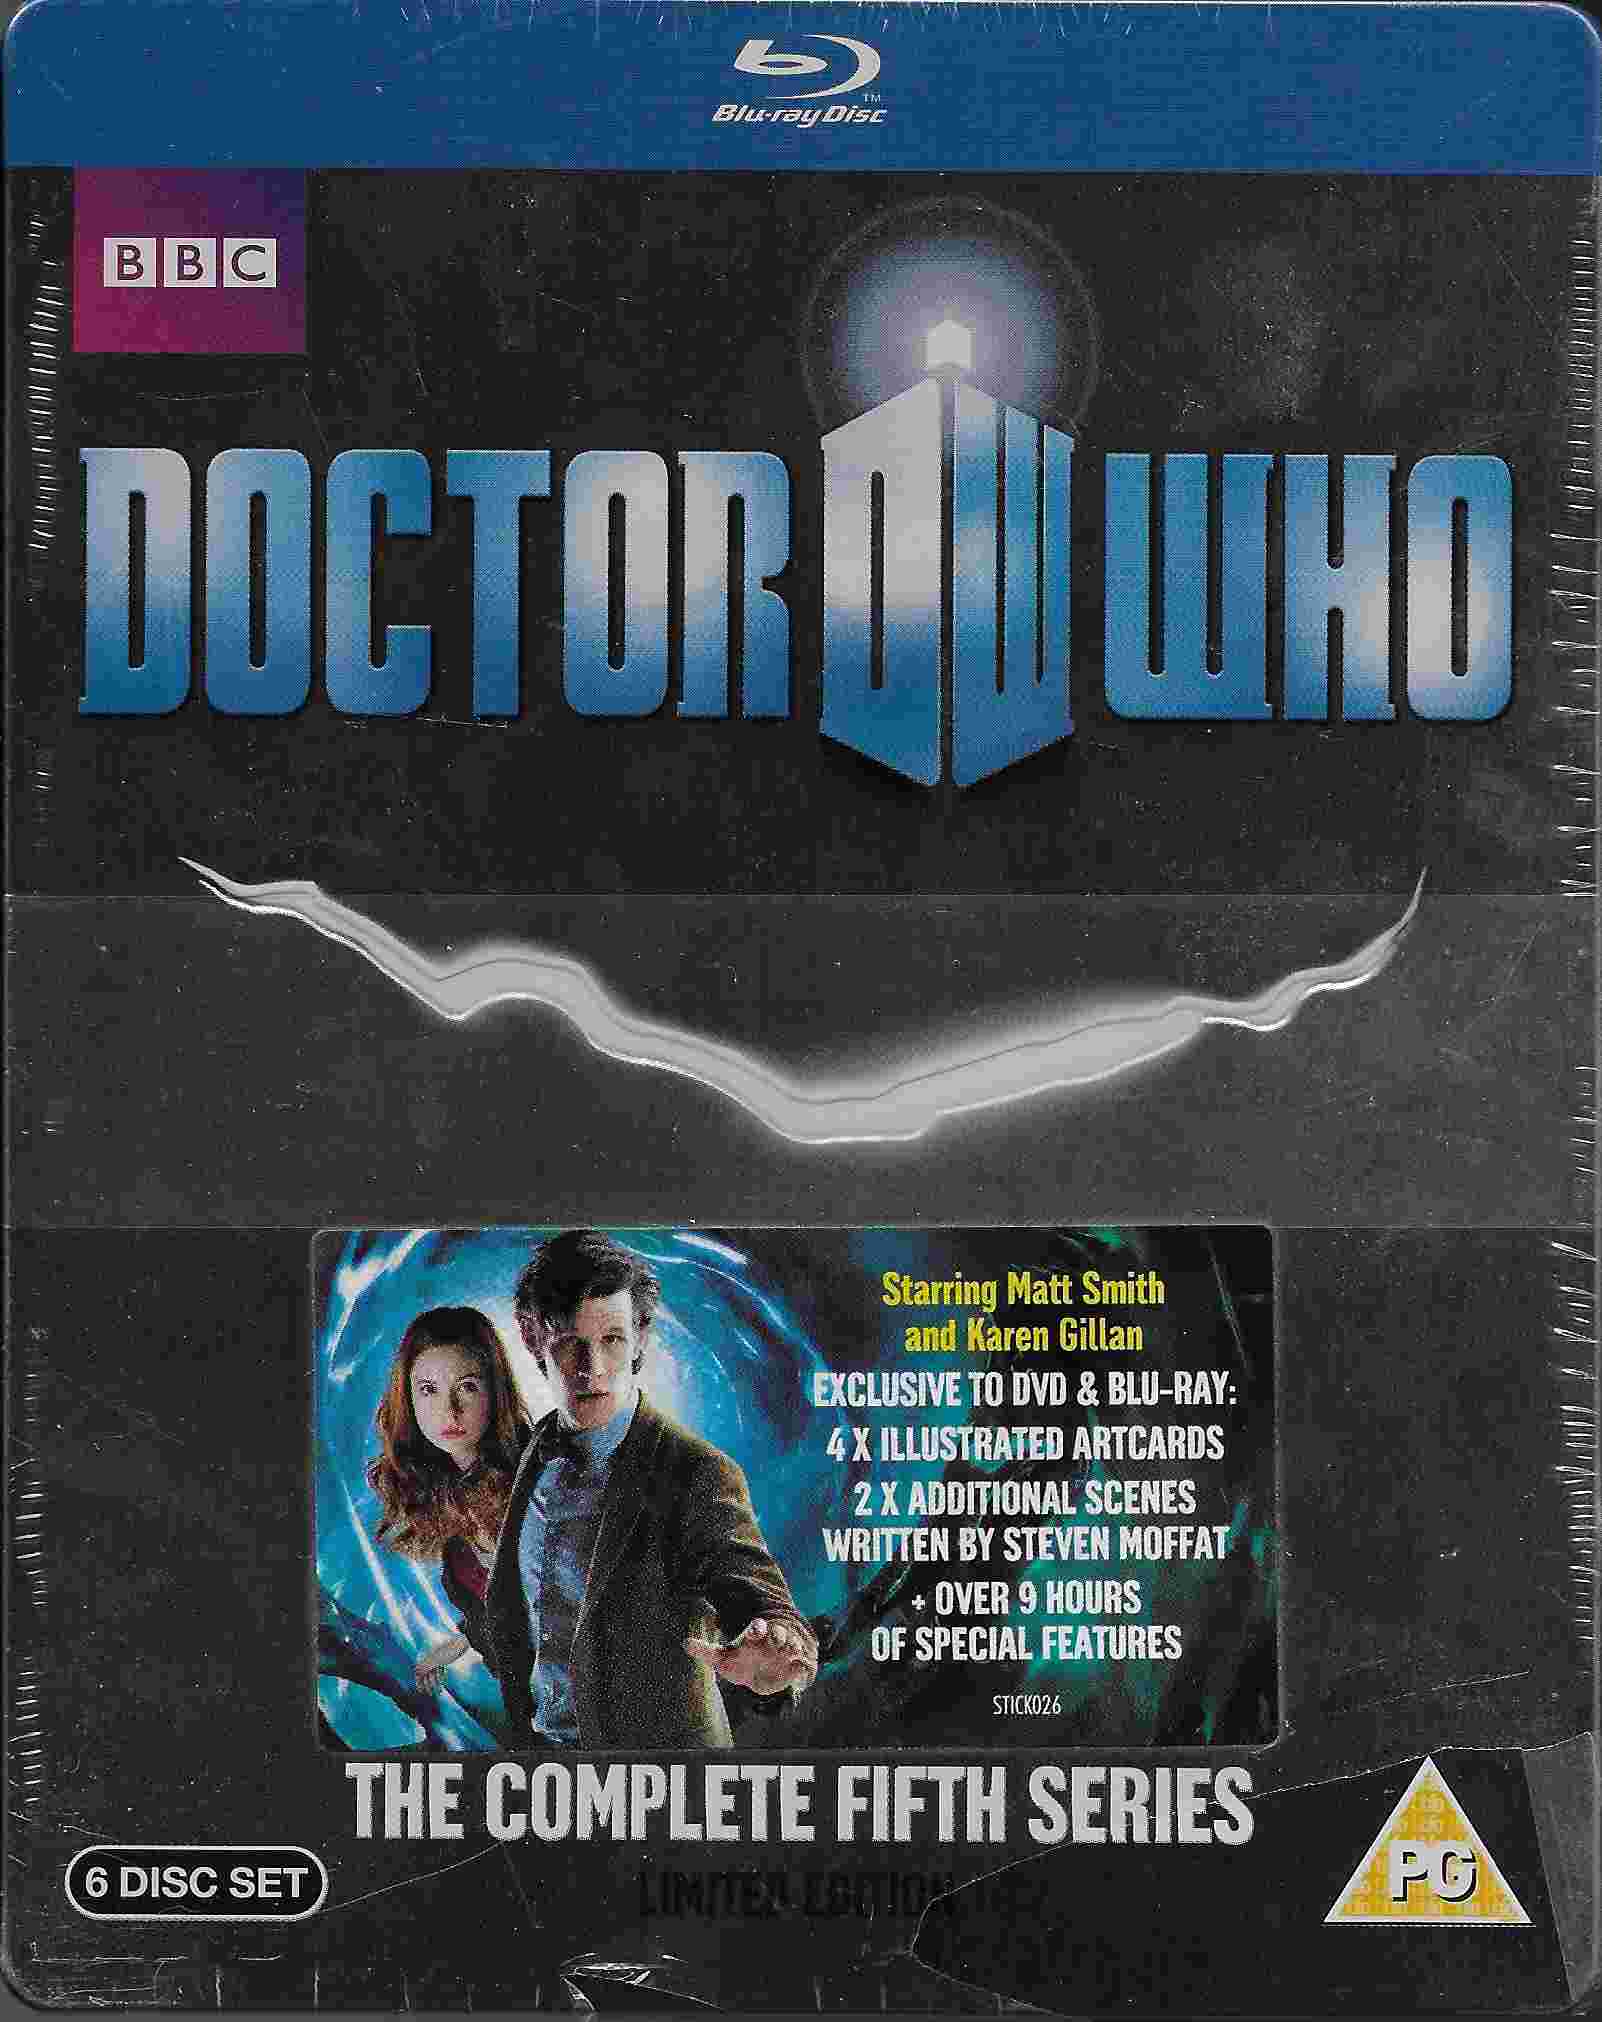 Picture of BBCBD 0130 Doctor Who - The complete fifth series (Limited edition) by artist Various from the BBC blu-rays - Records and Tapes library